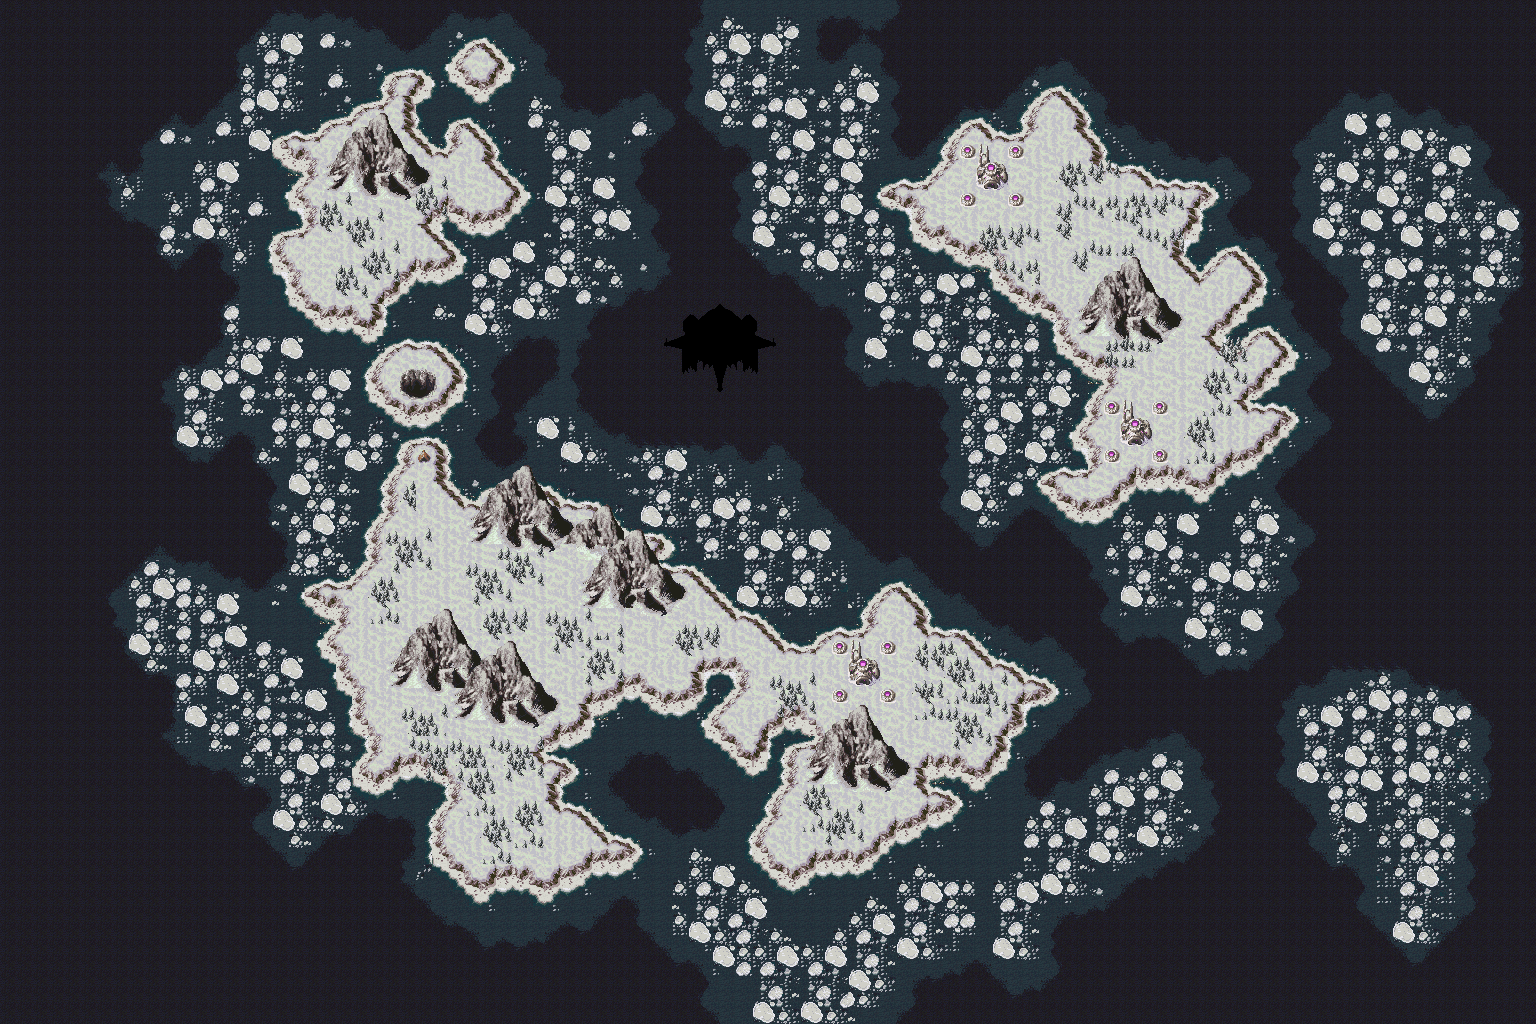 Chrono Trigger (Prototype) - Dark Ages Map (Pre-Disaster)